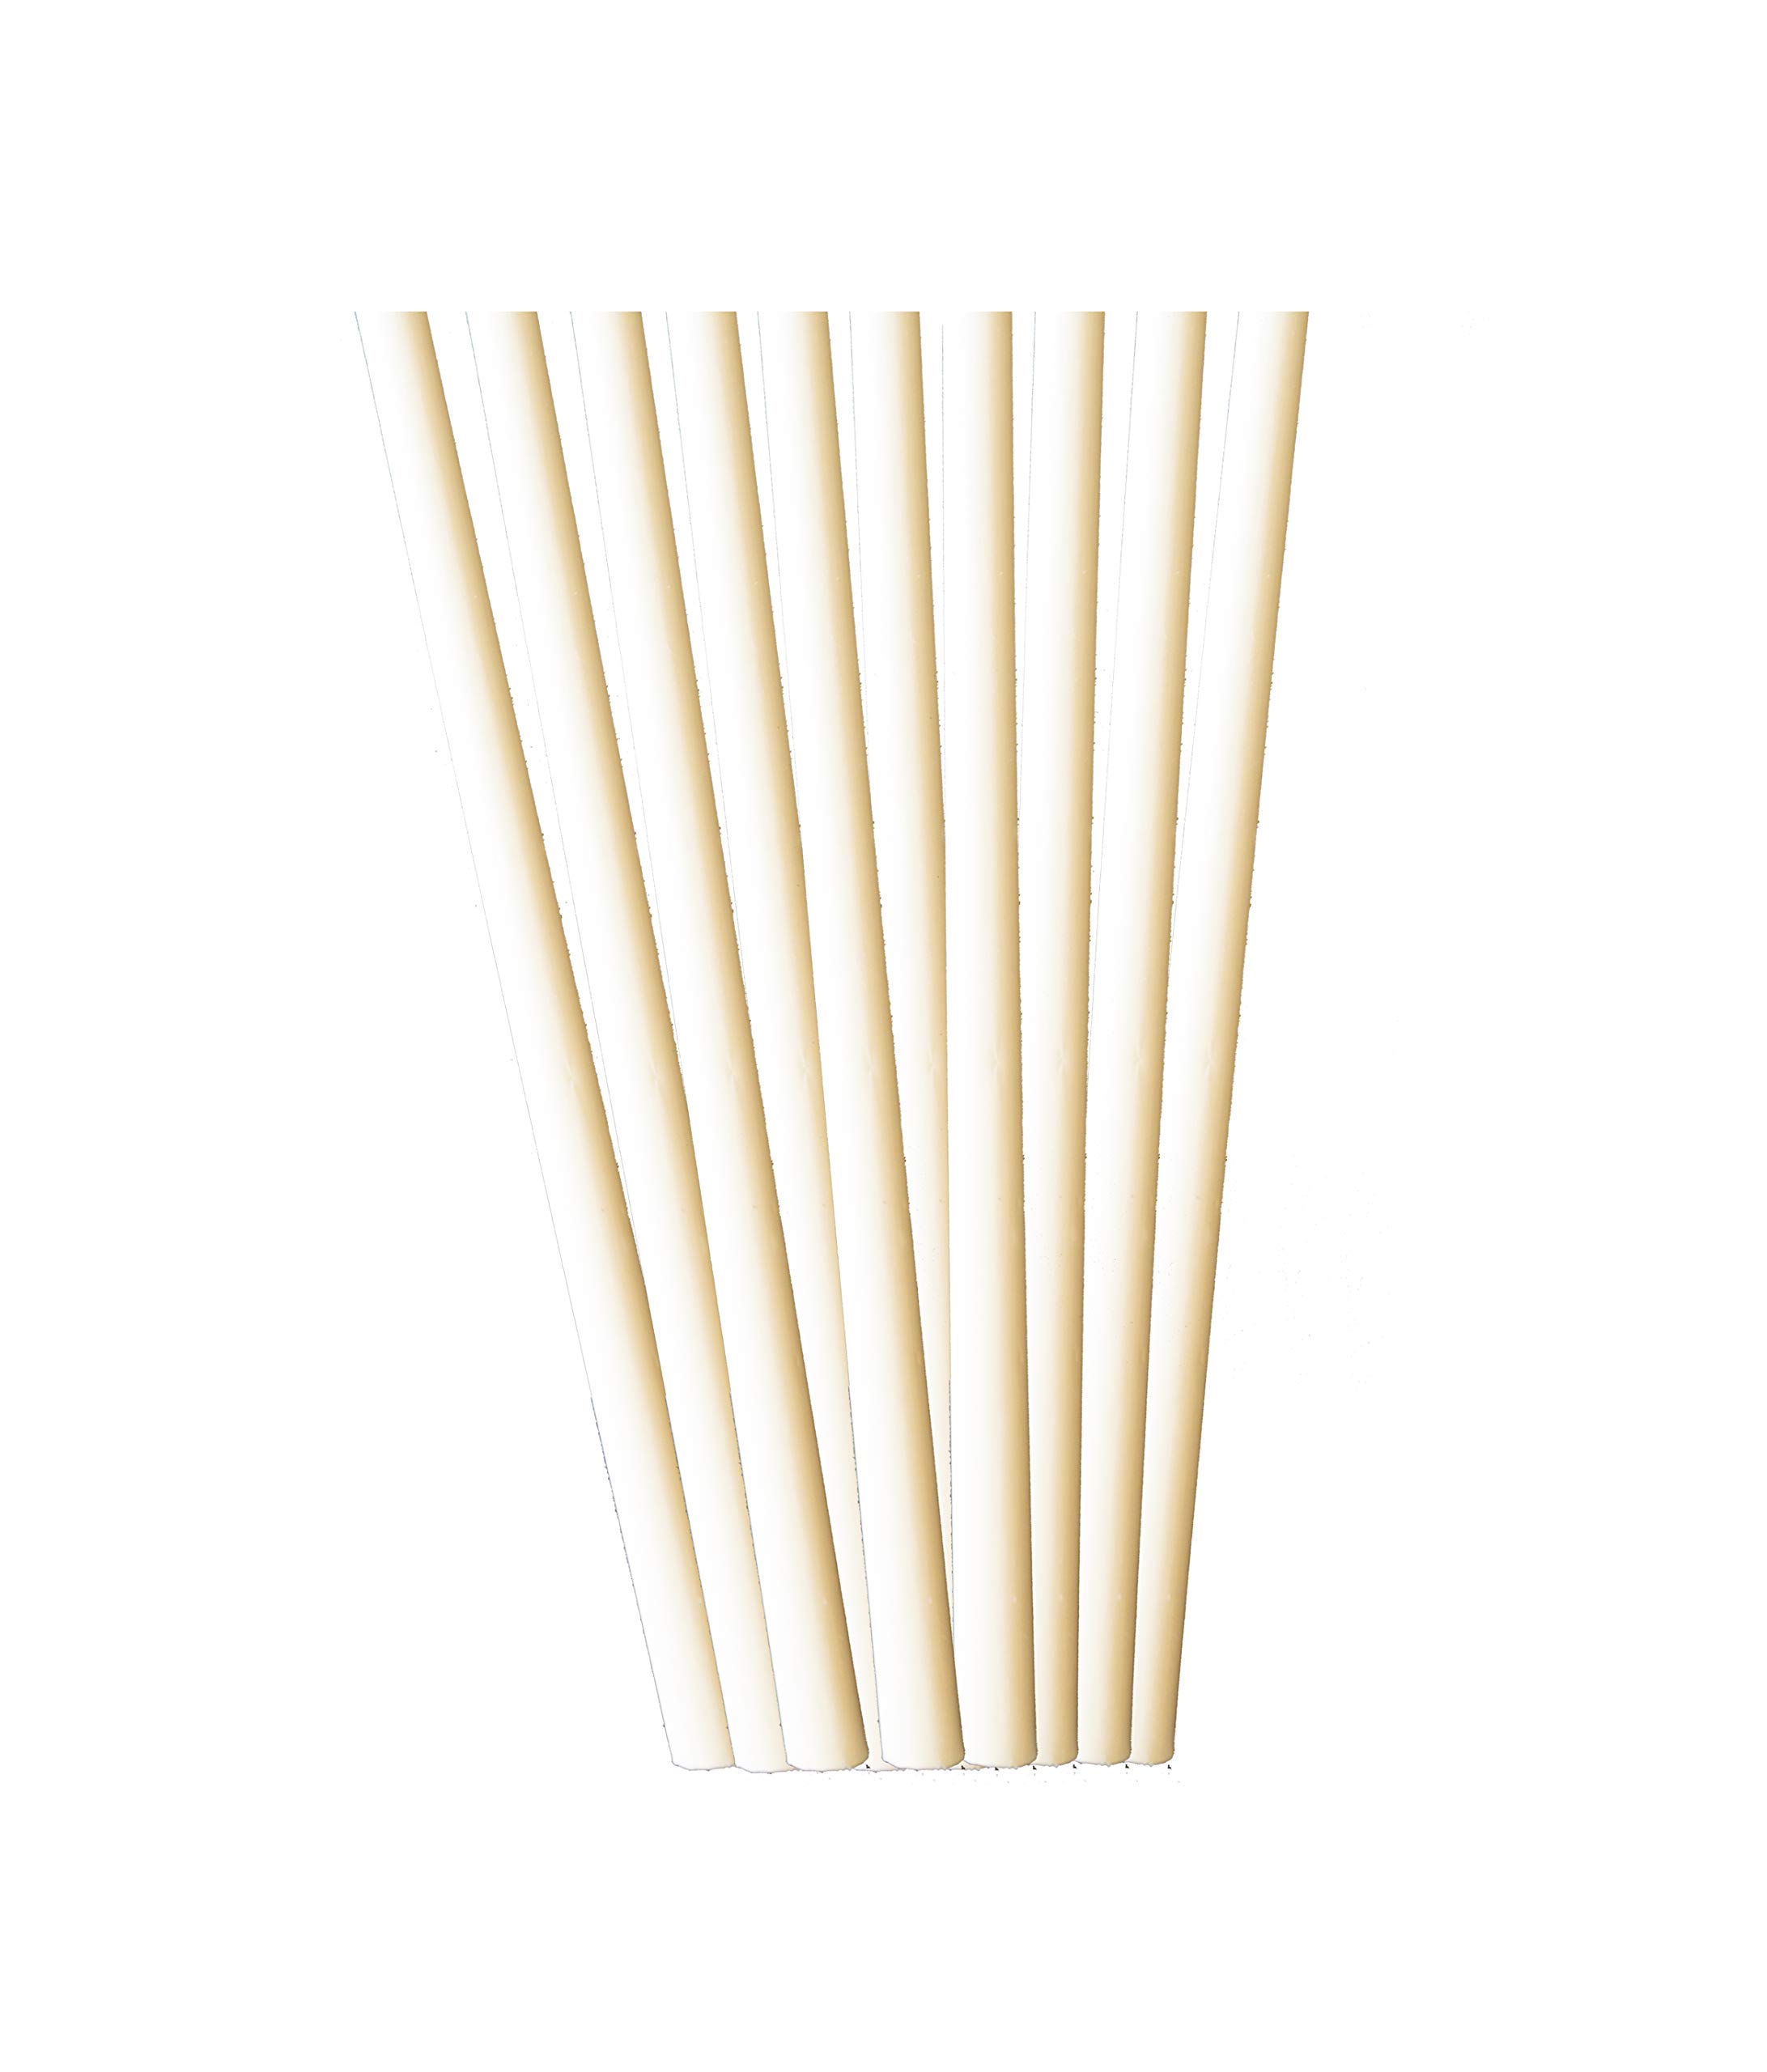 Avocado Seed Cocktail Straws- Extra Strength 100% compostable Straws - 1000 count, 5.75" unwrapped